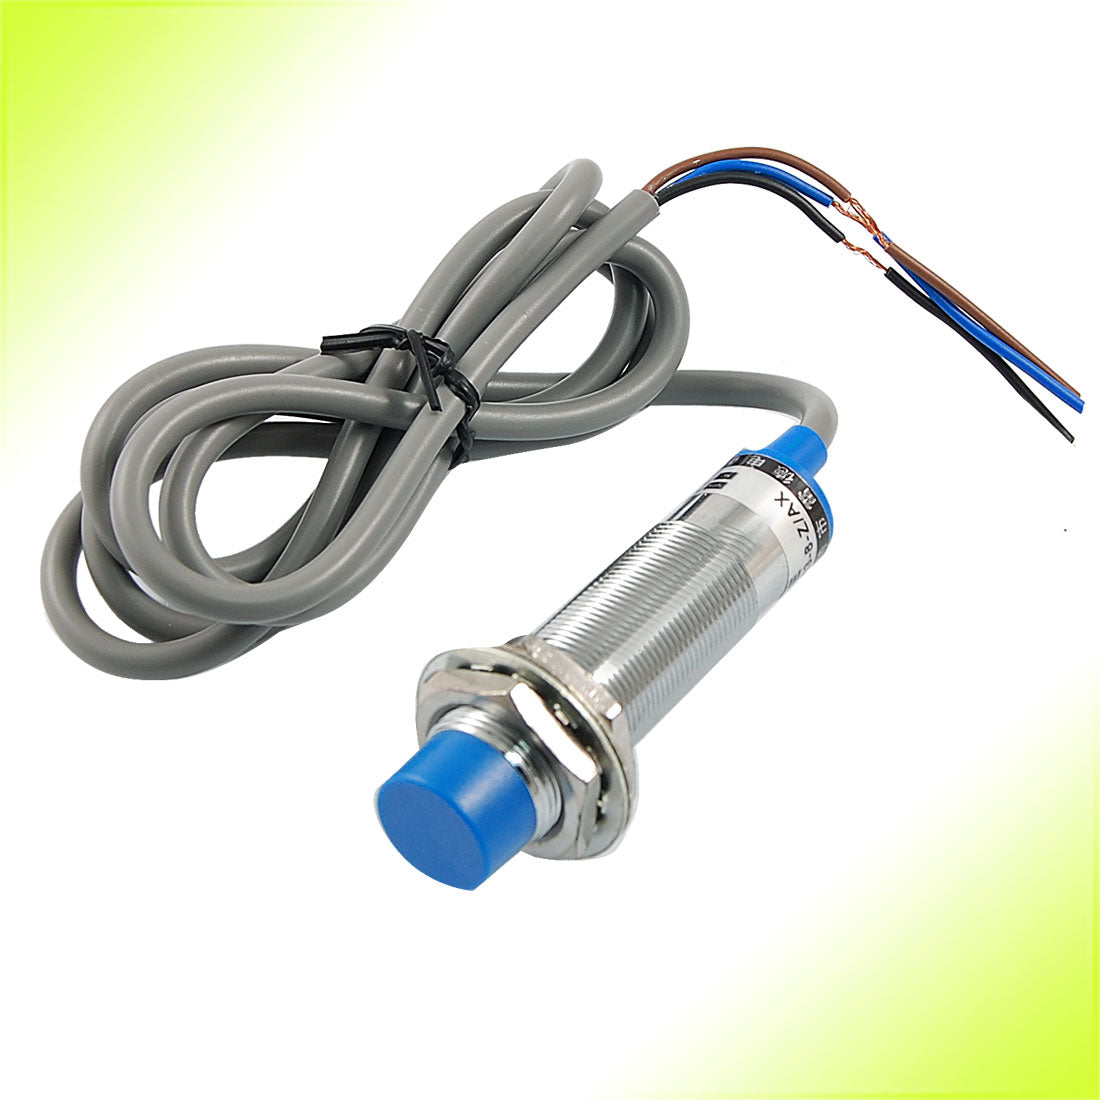 uxcell Uxcell LJ18A3-8-Z/AX 3 Wires DC 6-36V 300mA NPN NC 8mm Tubular Inductive Proximity Sensor Switch with Grey Wire